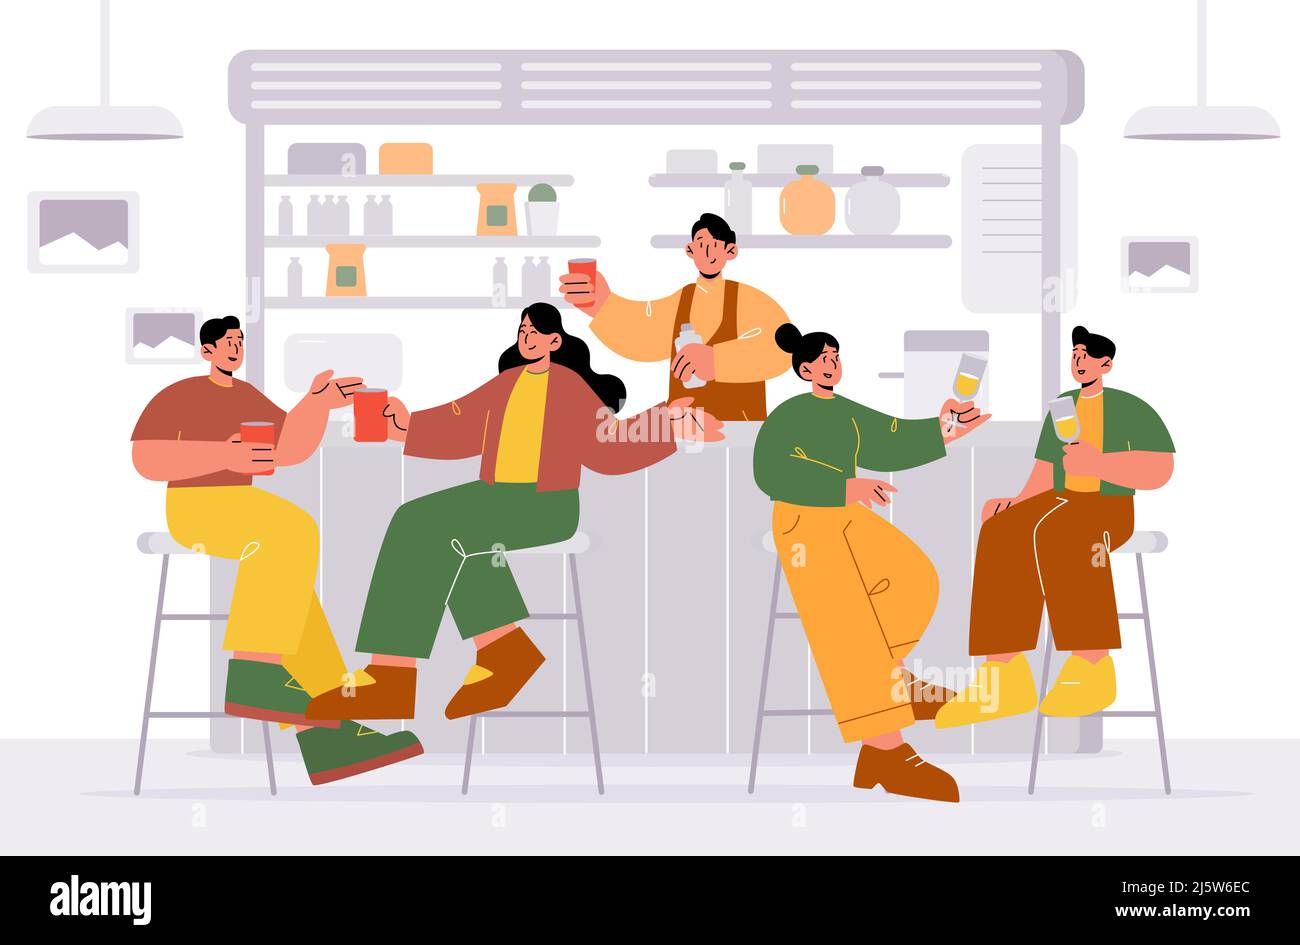 People drinking alcohol in bar, young couples dating, celebrate party. Male and female characters with wineglasses communicate sit on high chairs at desk with barista, Linear flat vector illustration Stock Vector